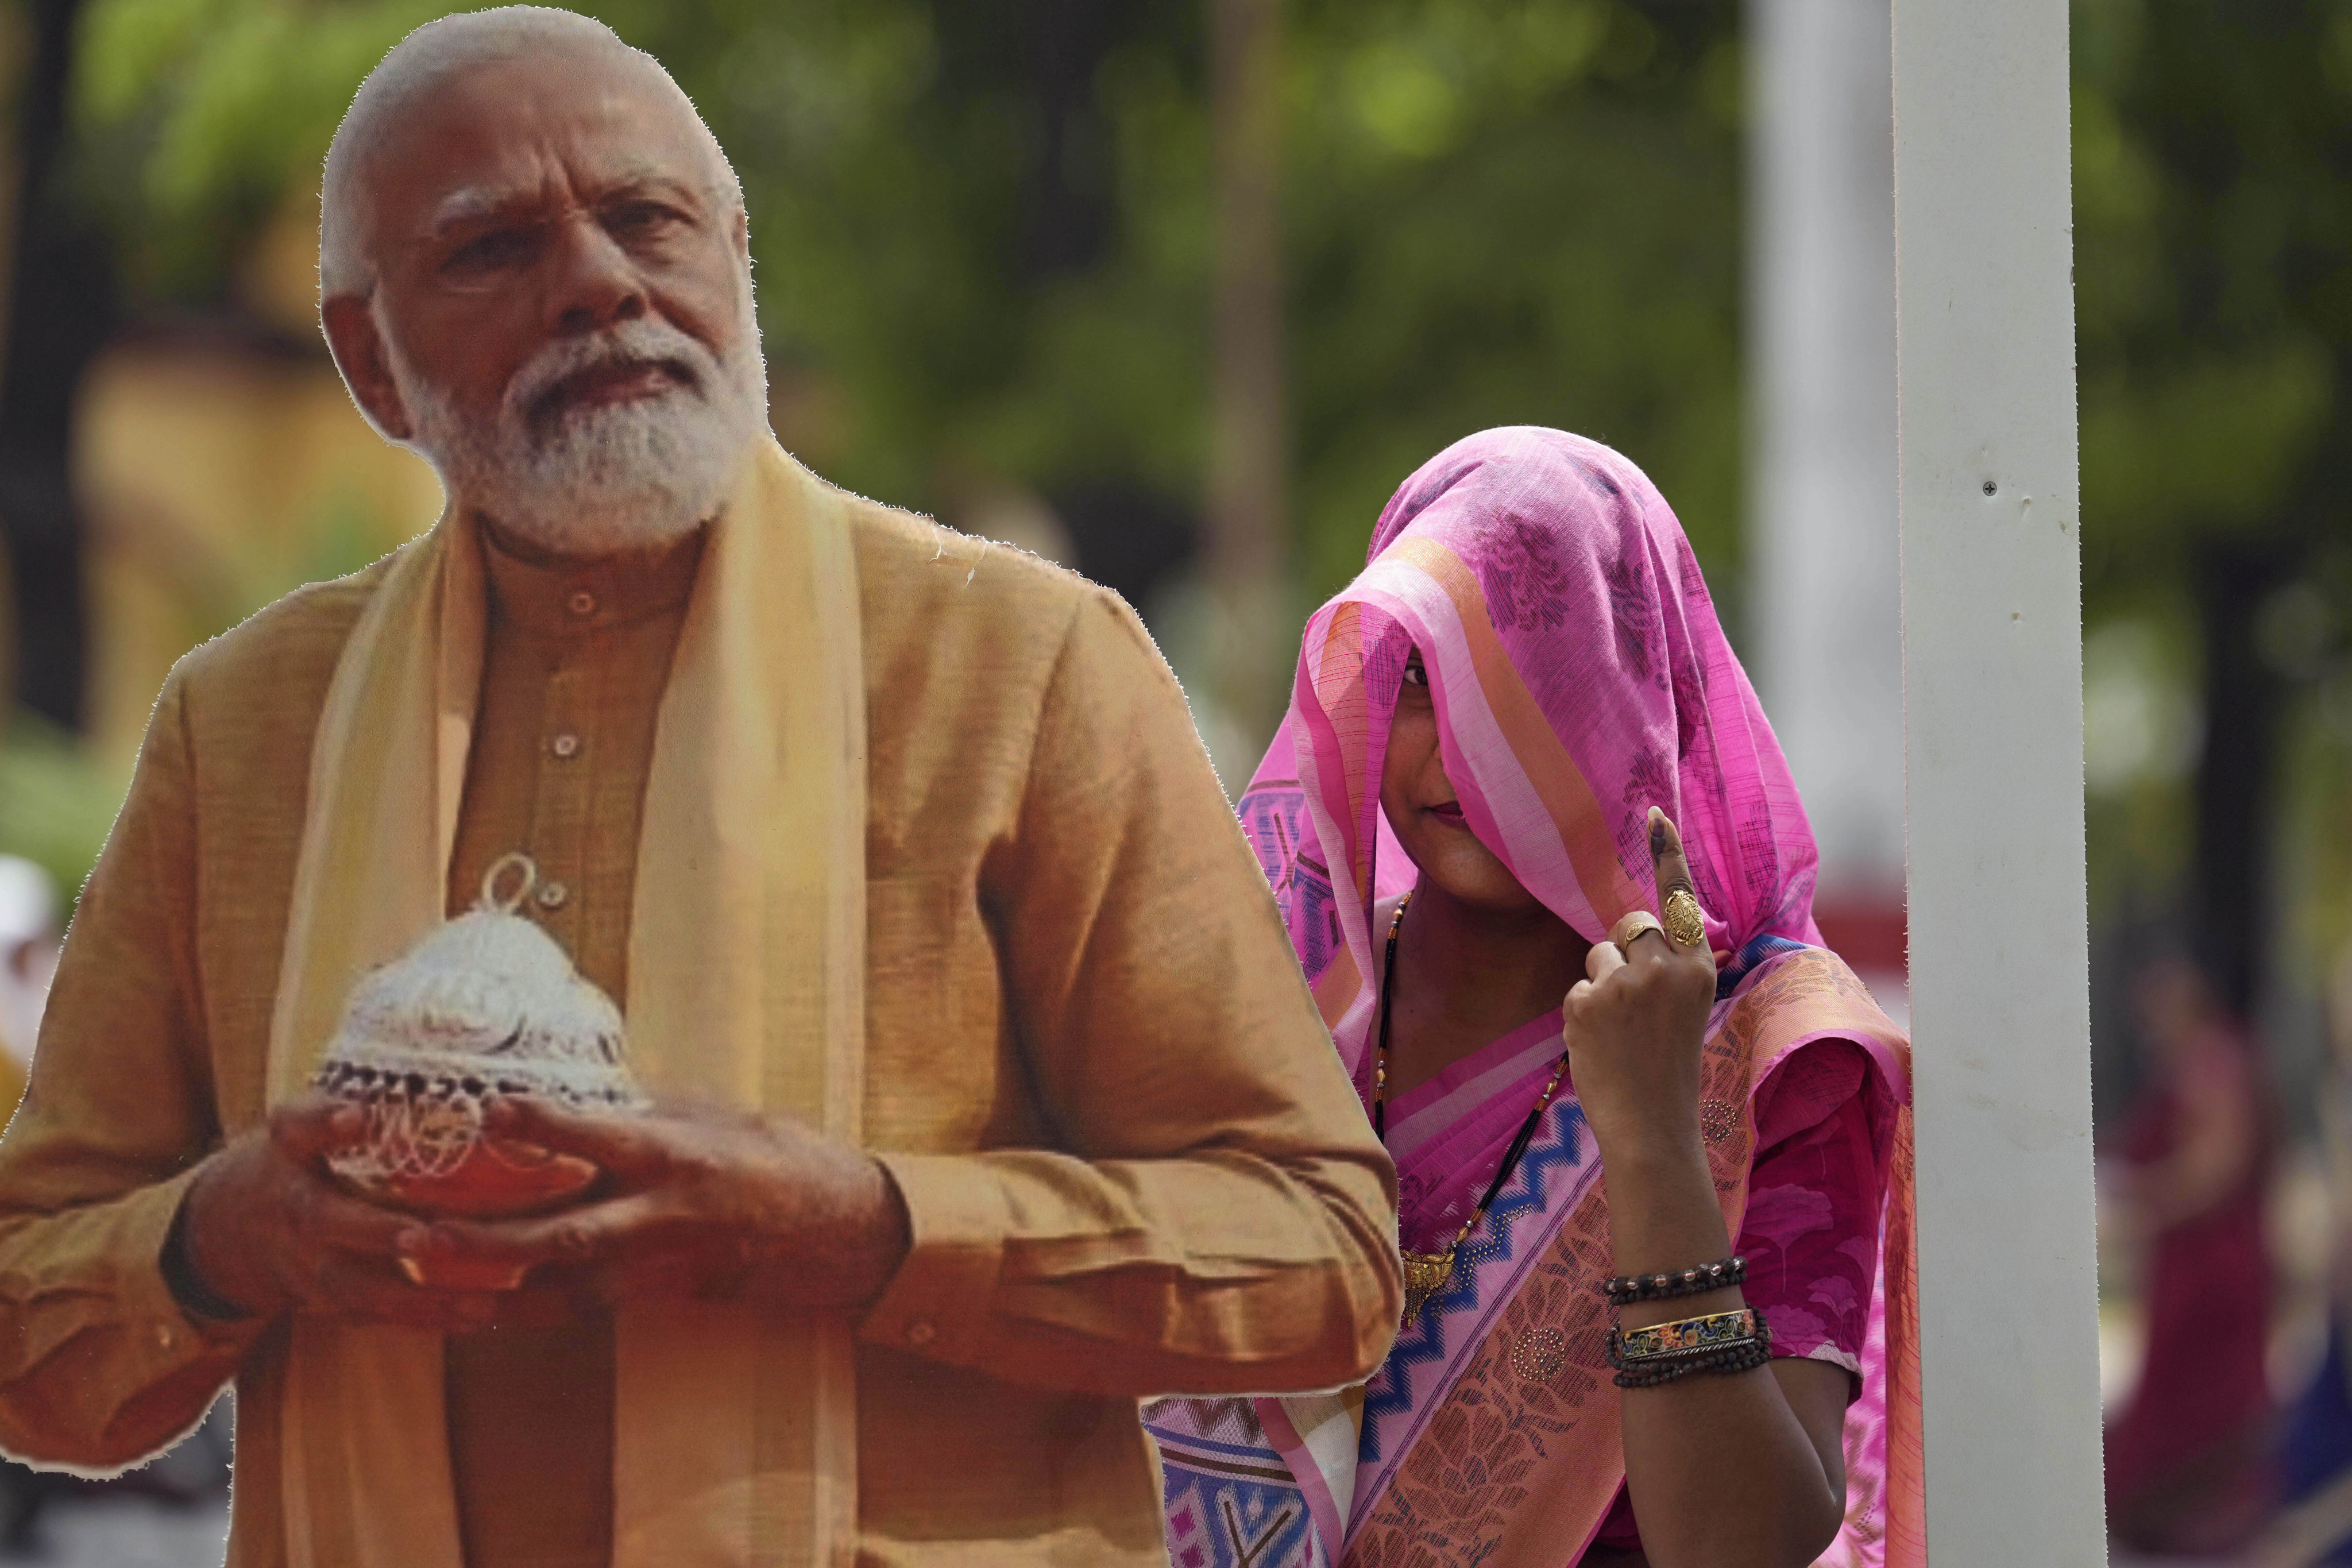 A woman shows her index finger marked with an indelible ink as she poses for a photograph next to a cut-out portrait of Indian Prime Minister Narendra Modi after voting in Varanasi, India, on Saturday. Photo: AP